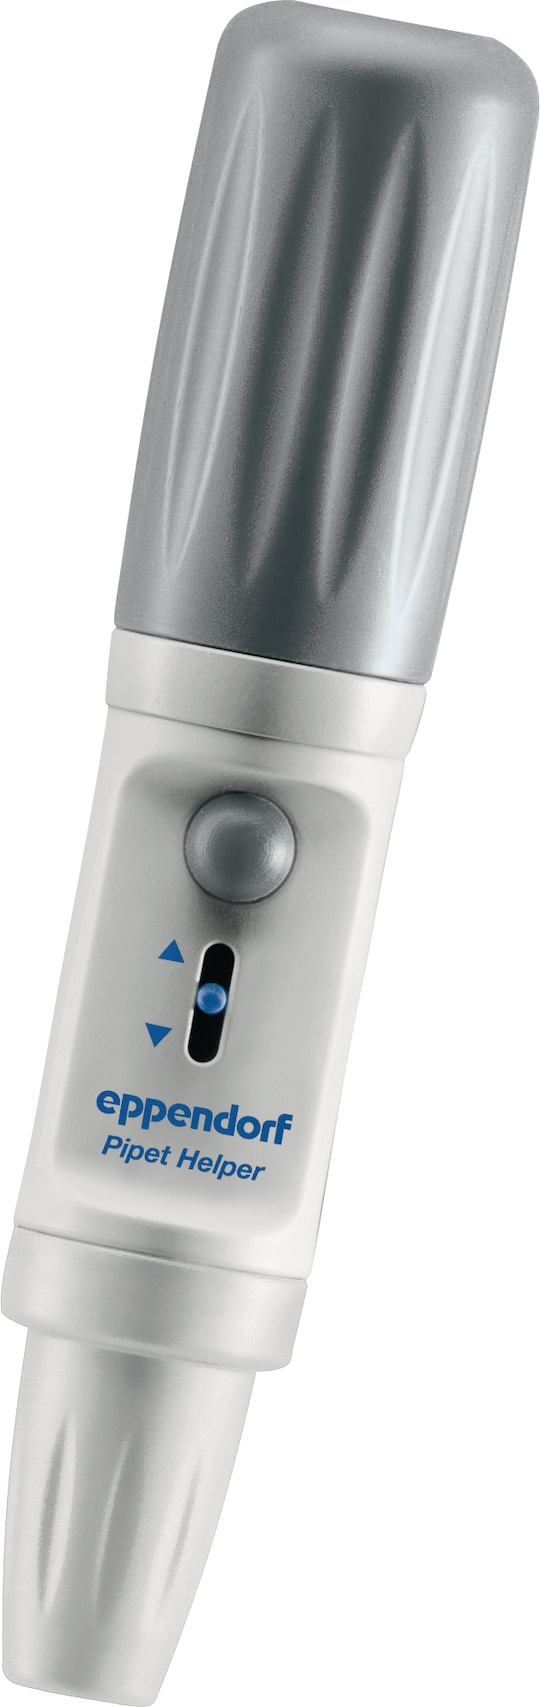 Pipet Helper® mechanical pipette controller from Eppendorf